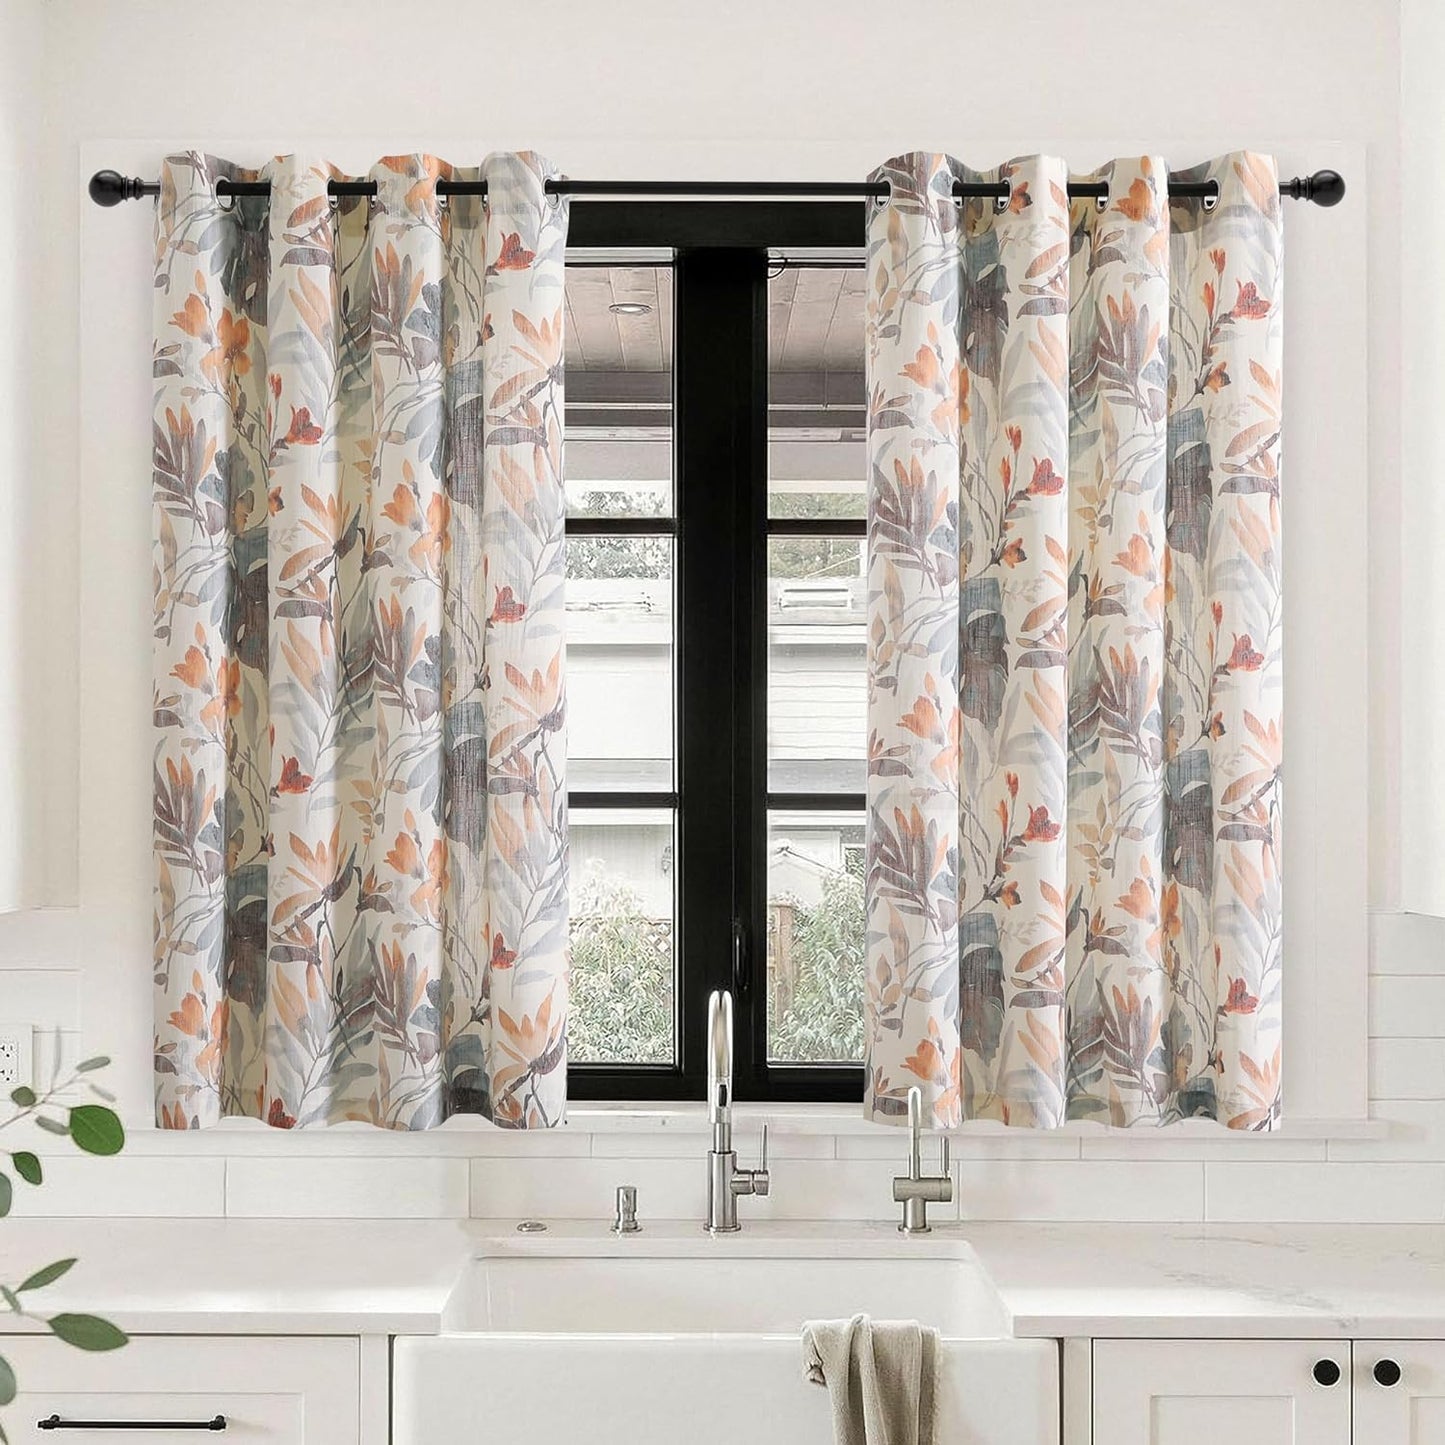 MYSKY HOME Floral Curtains 84 Inches Long Printed Grommet Cotton Curtains for Living Room Bedroom Light Filtering Linen Style Curtain Burlap Effect Drape Window Treatments, 2 Panel Coral and Natural  MYSKY HOME A-Coral/Natural 52"W X 54"L 